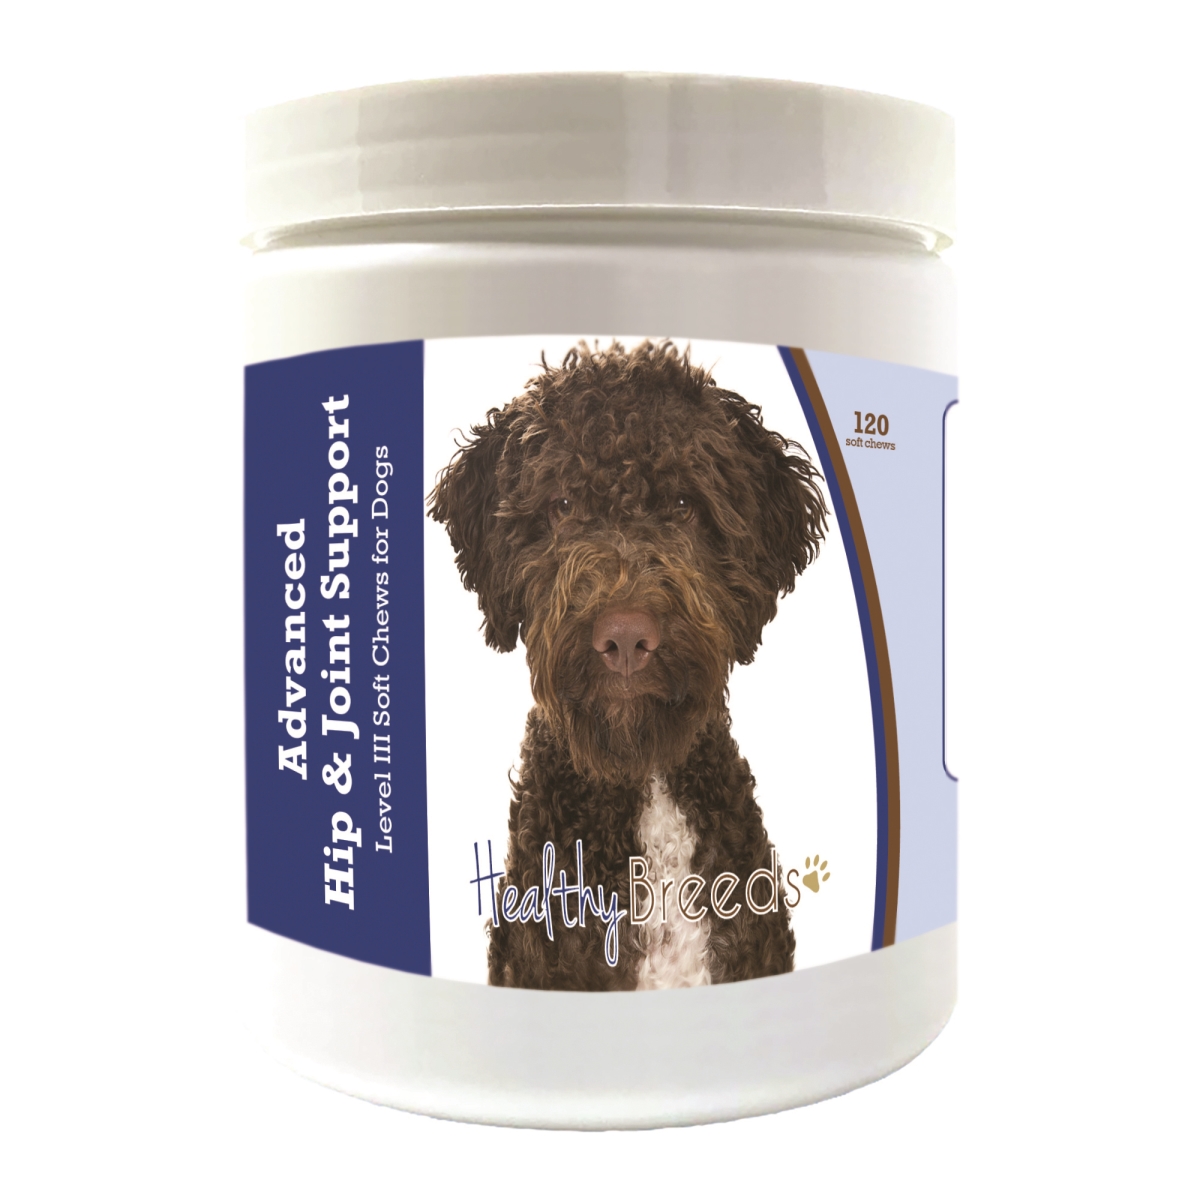 Picture of Healthy Breeds 192959898576 Lagotti Romagnoli Advanced Hip & Joint Support Level III Soft Chews for Dogs